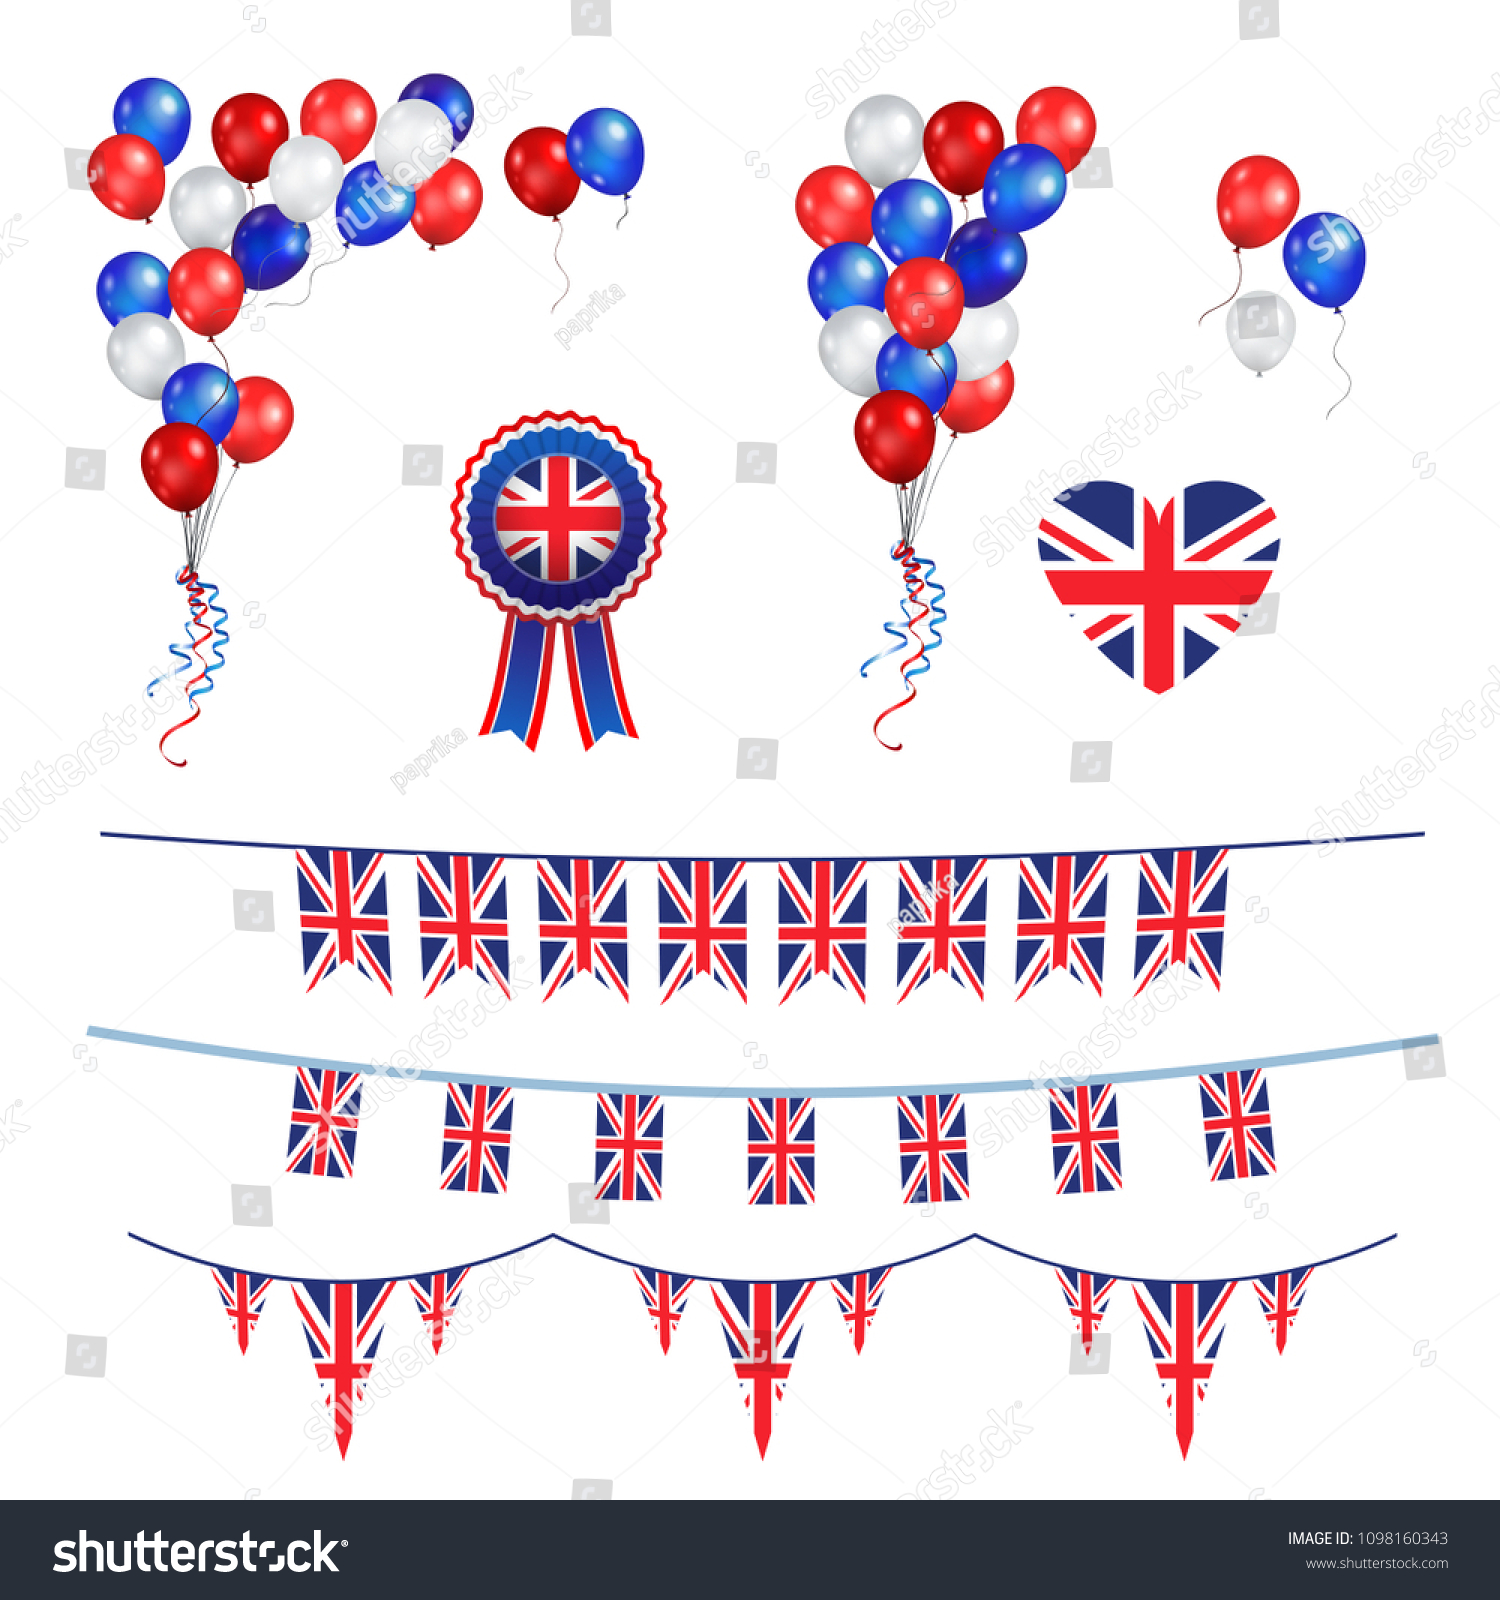 SVG of Balloons and Union Jack flag svg